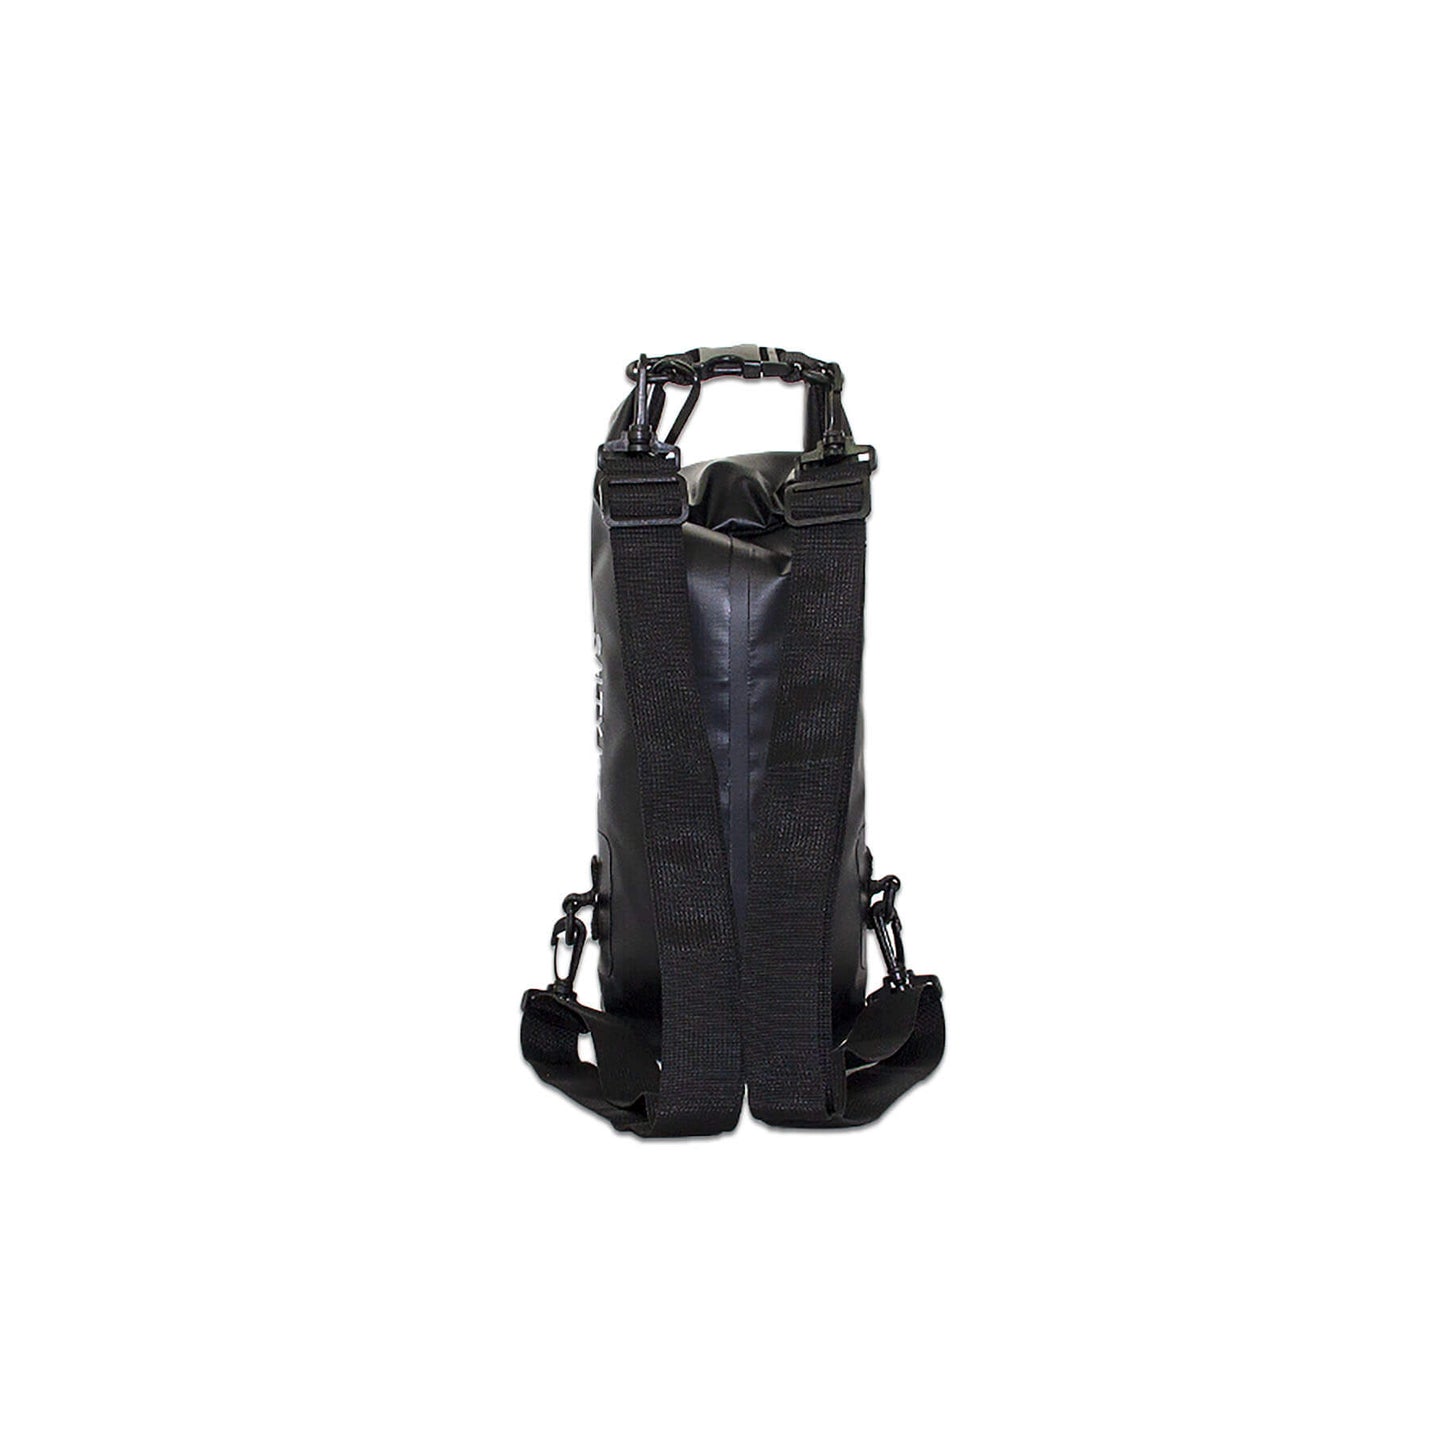 waterproof dry bag 5 litres a handy grab size with detachable straps and carabiner  in black the view of the back